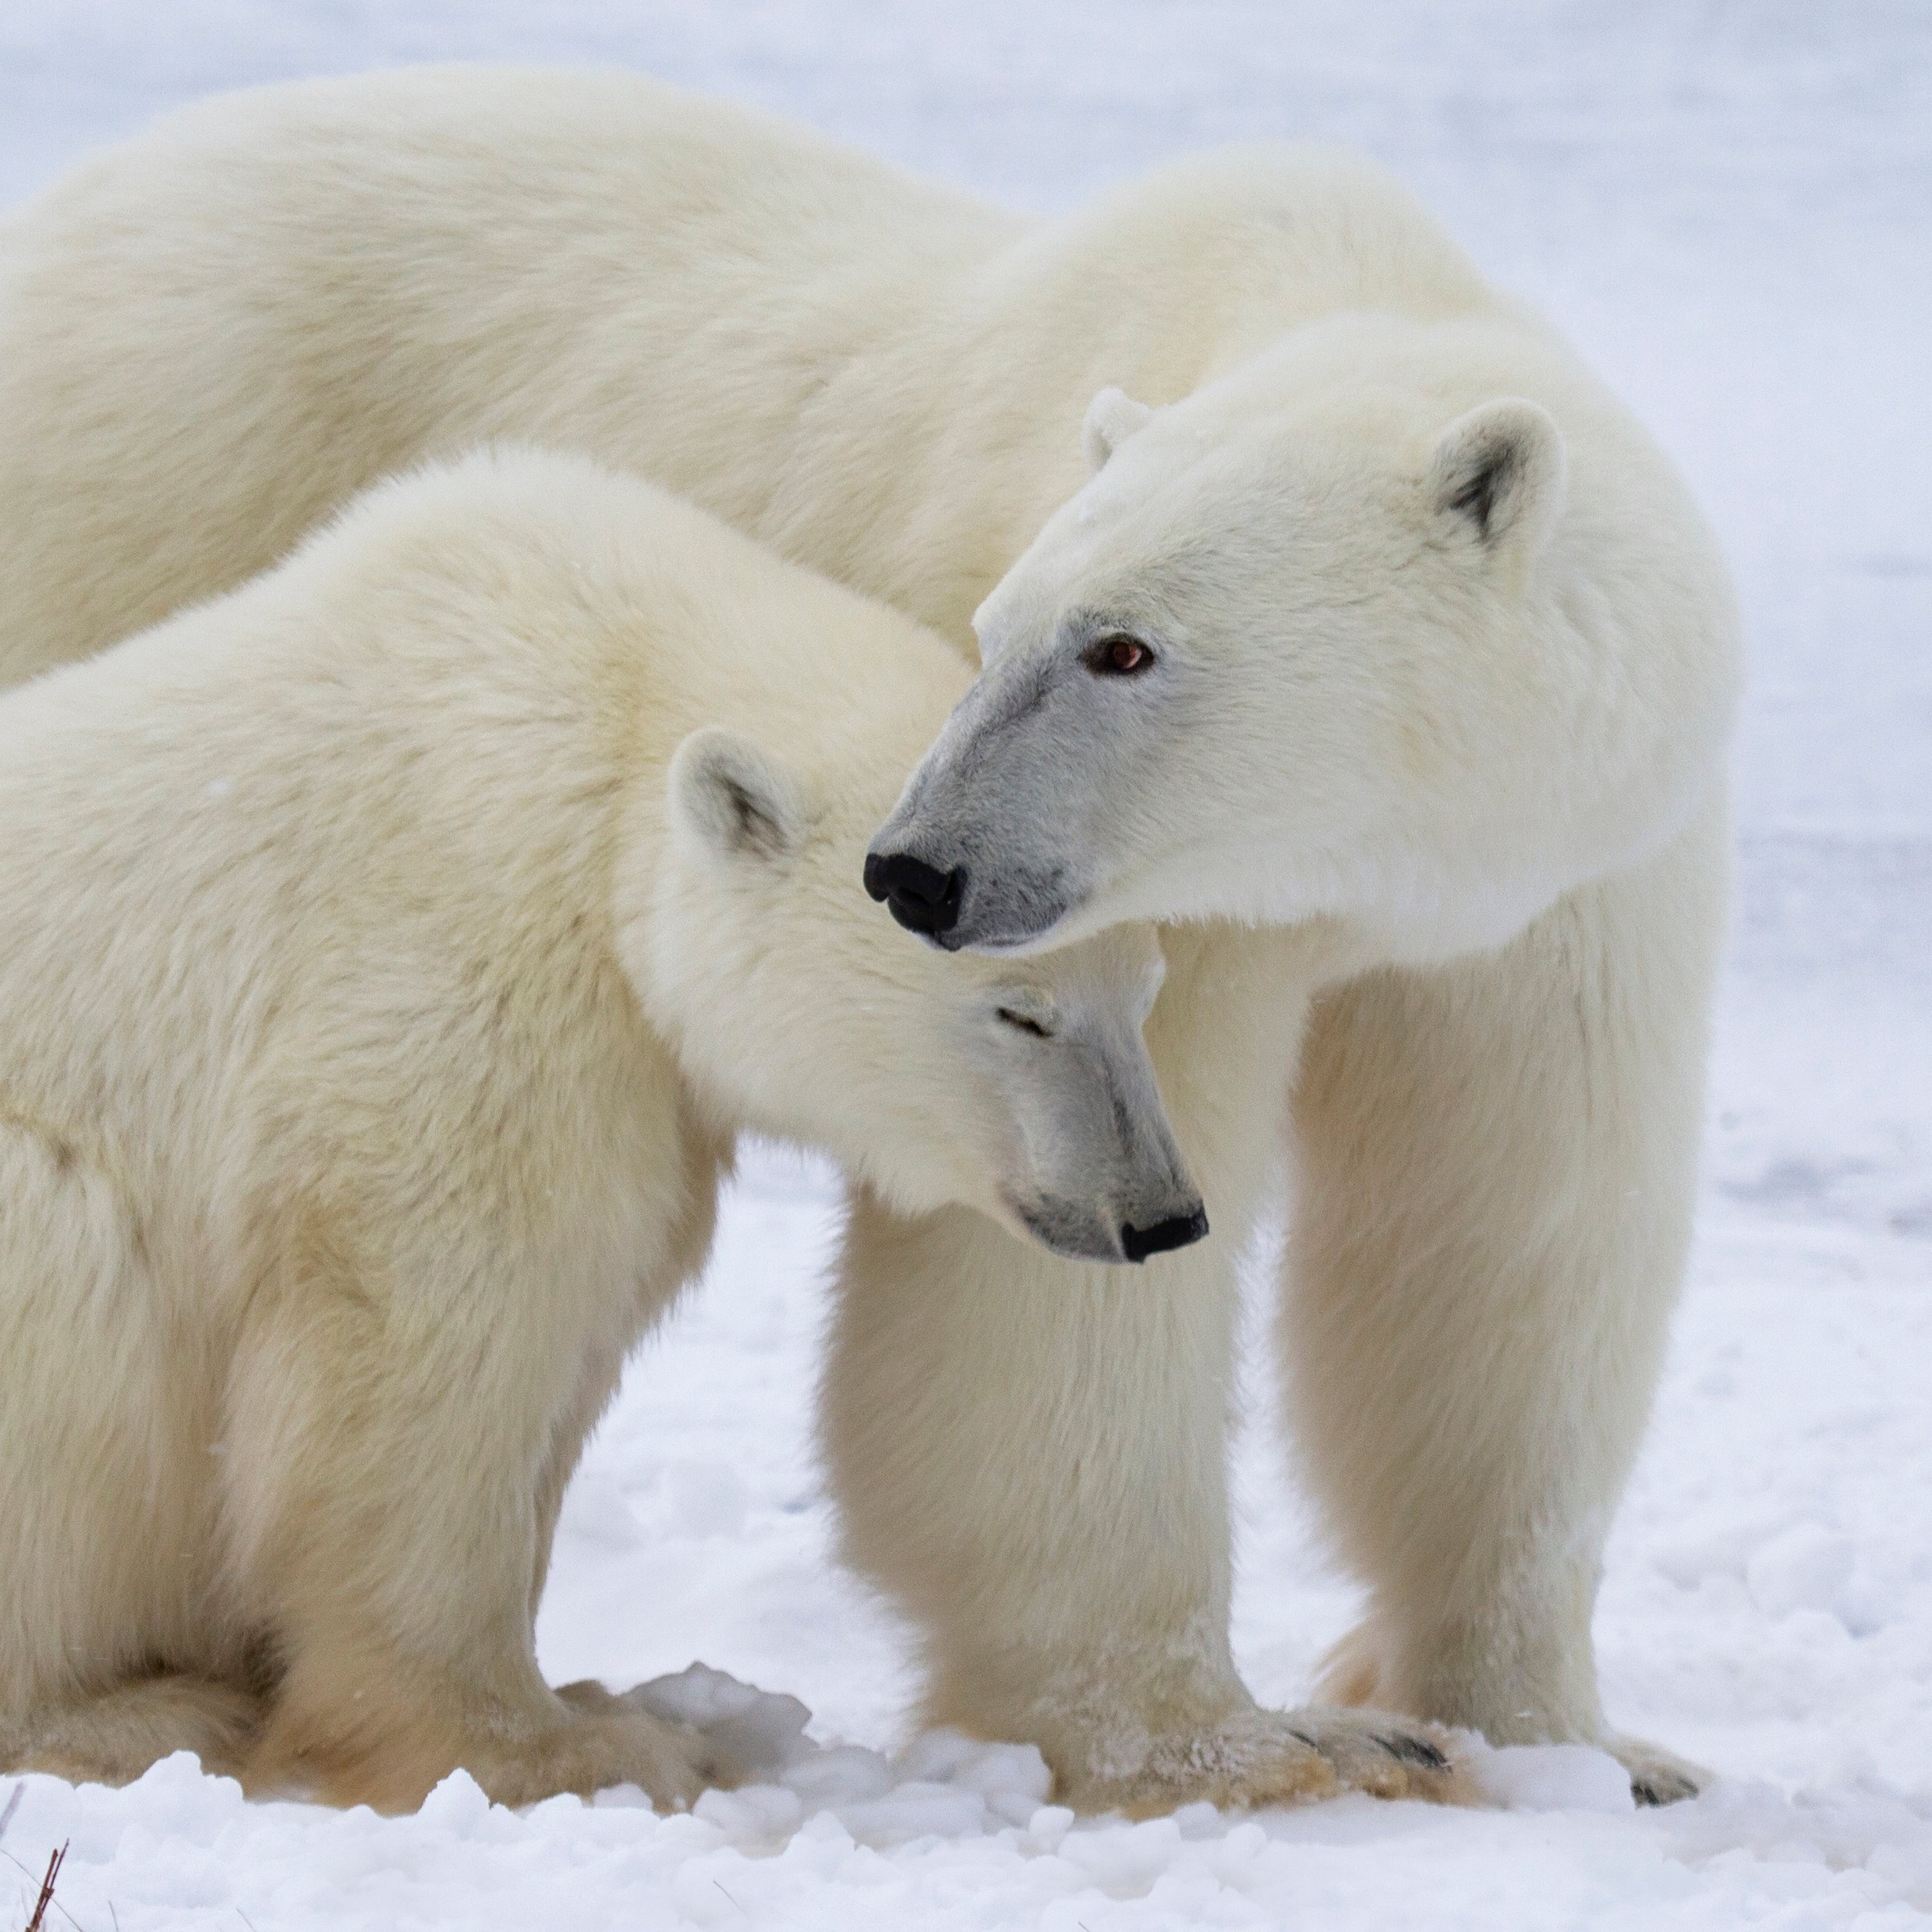 Polar bears are cute; Disney should donate money needed to save